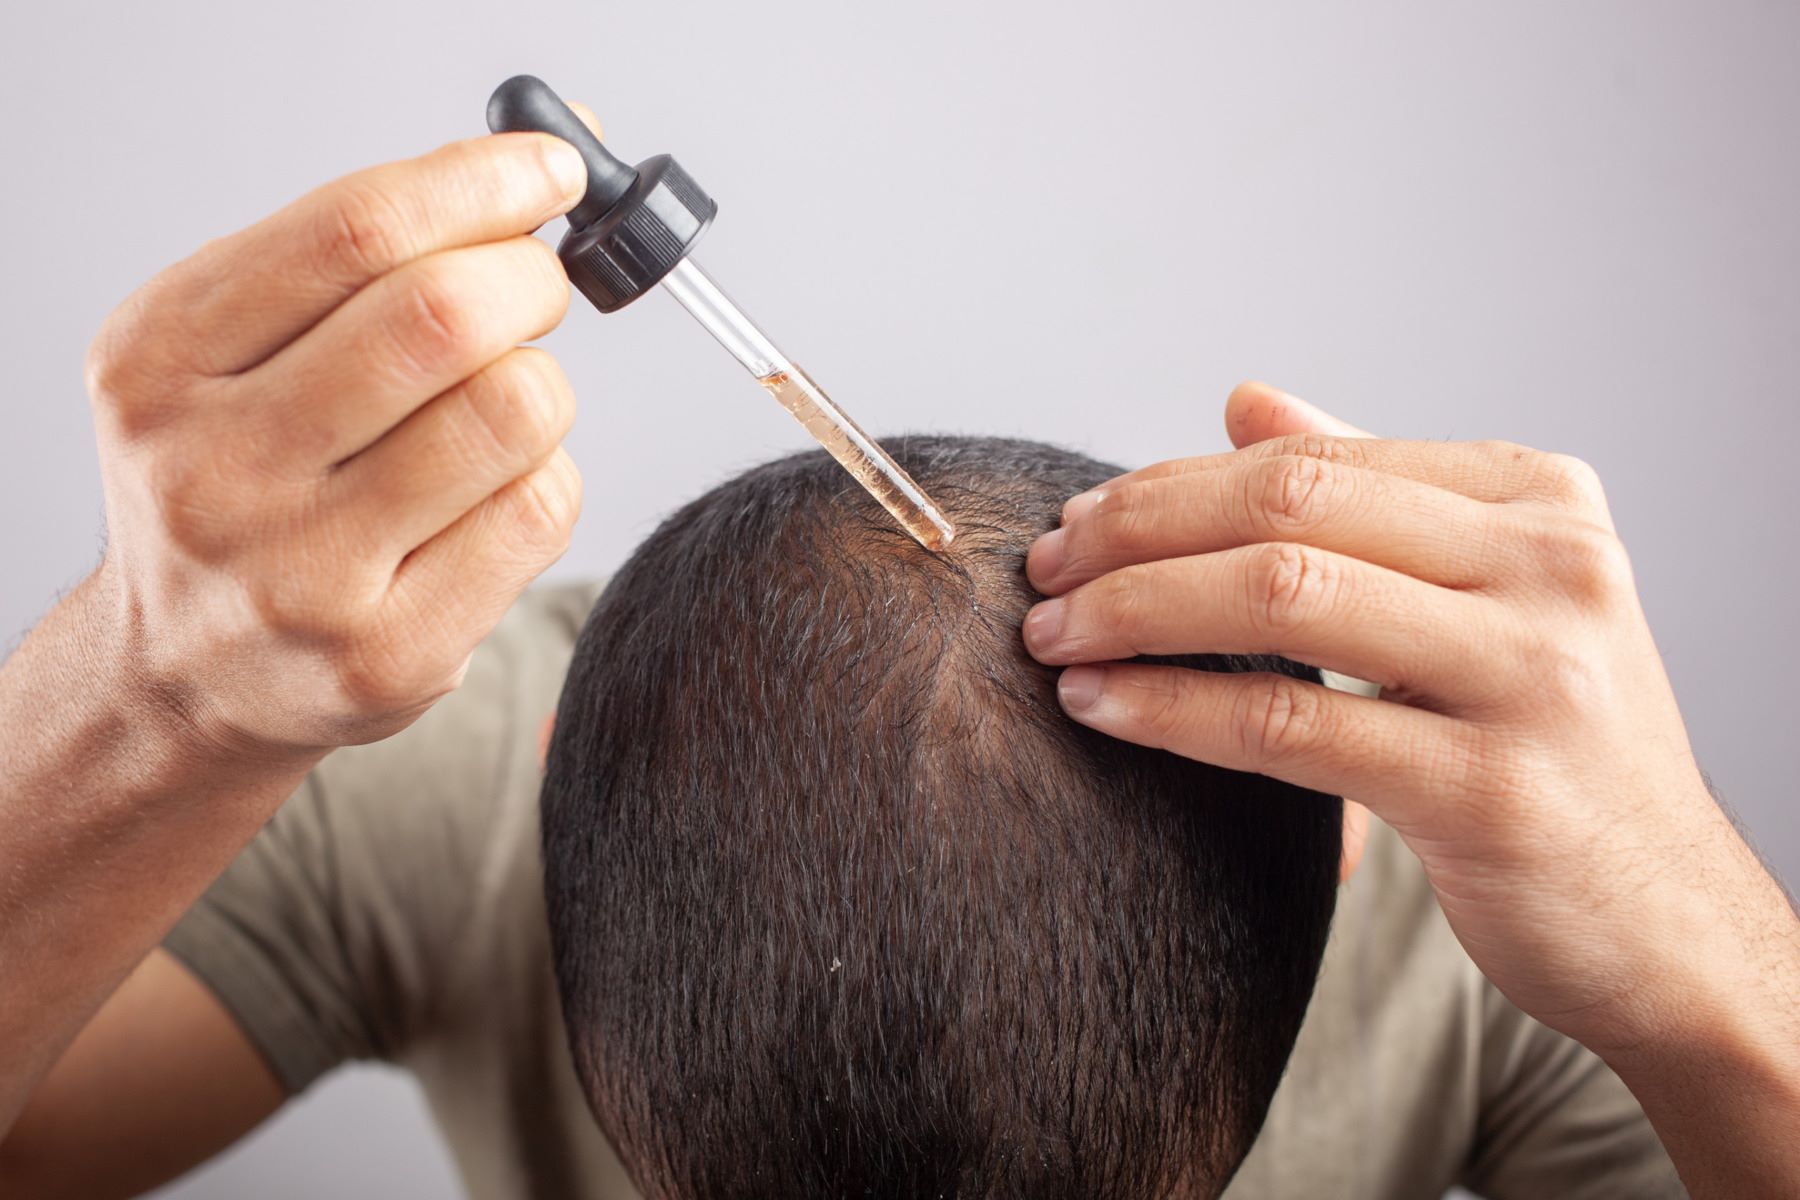 Can Laser Hair Growth Caps Really Regrow Hair? Evidence Review, Wimpole Clinic